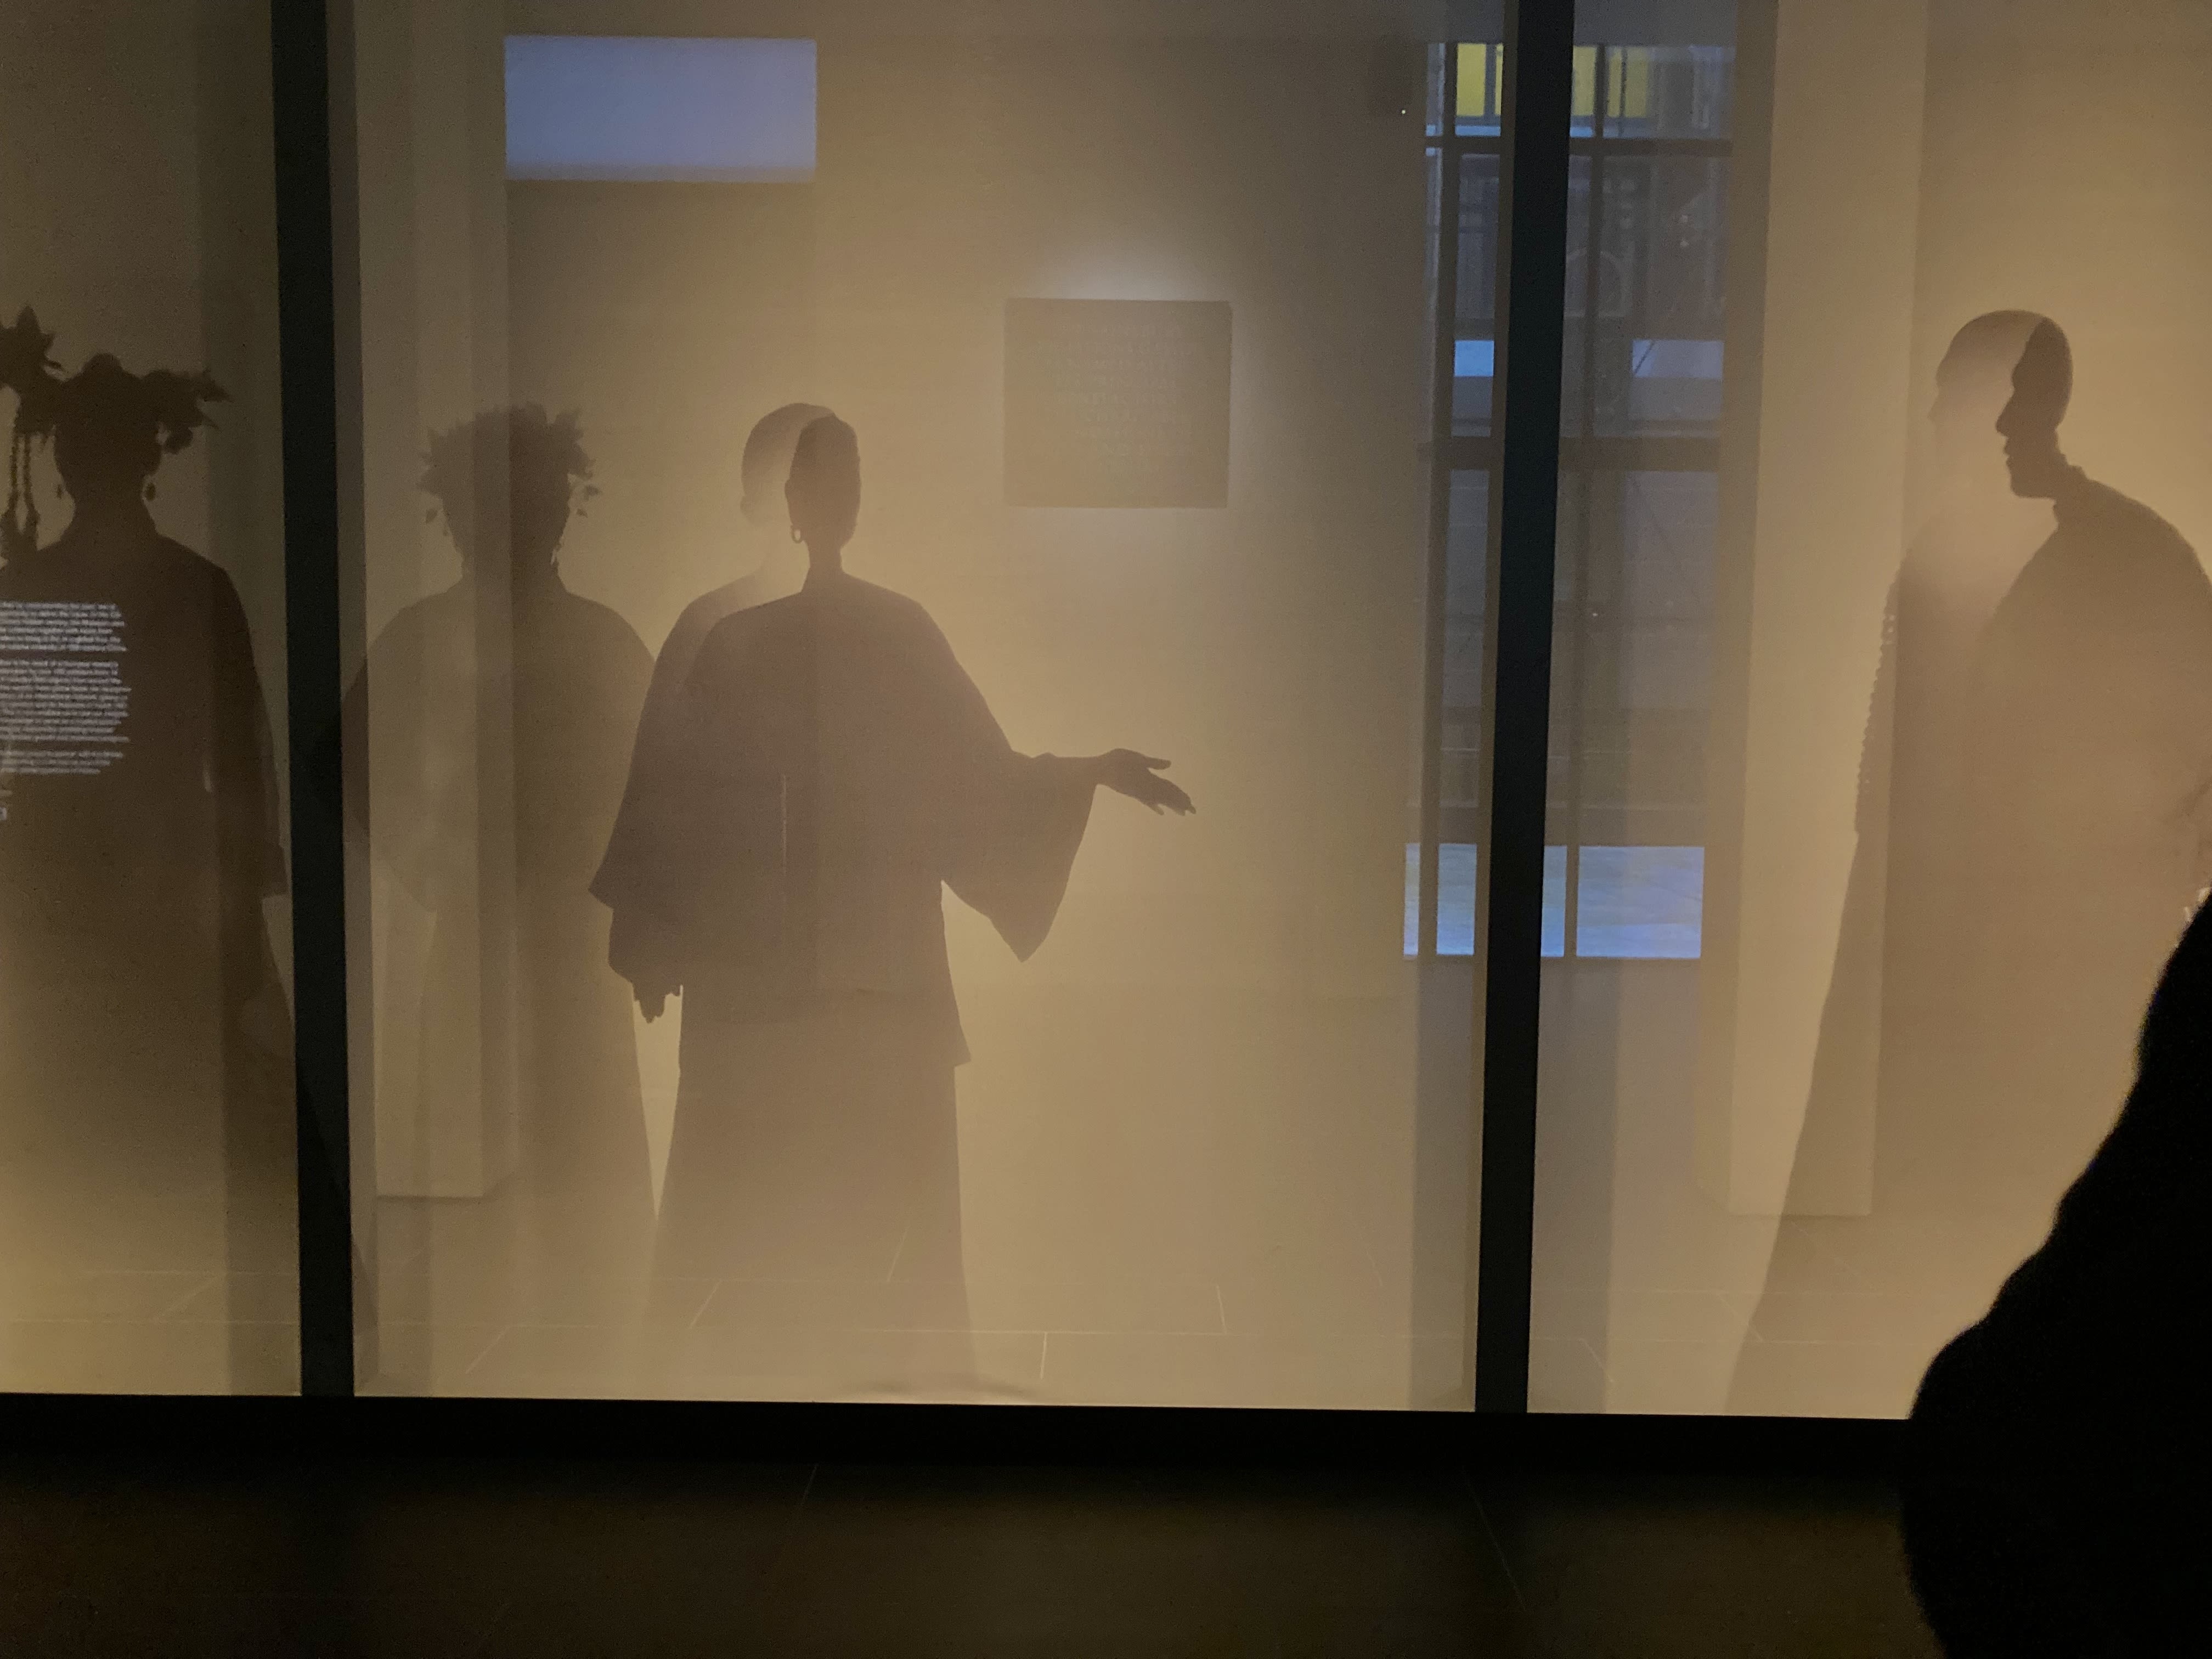 Silhouettes of 4 individuals behind a glass display window